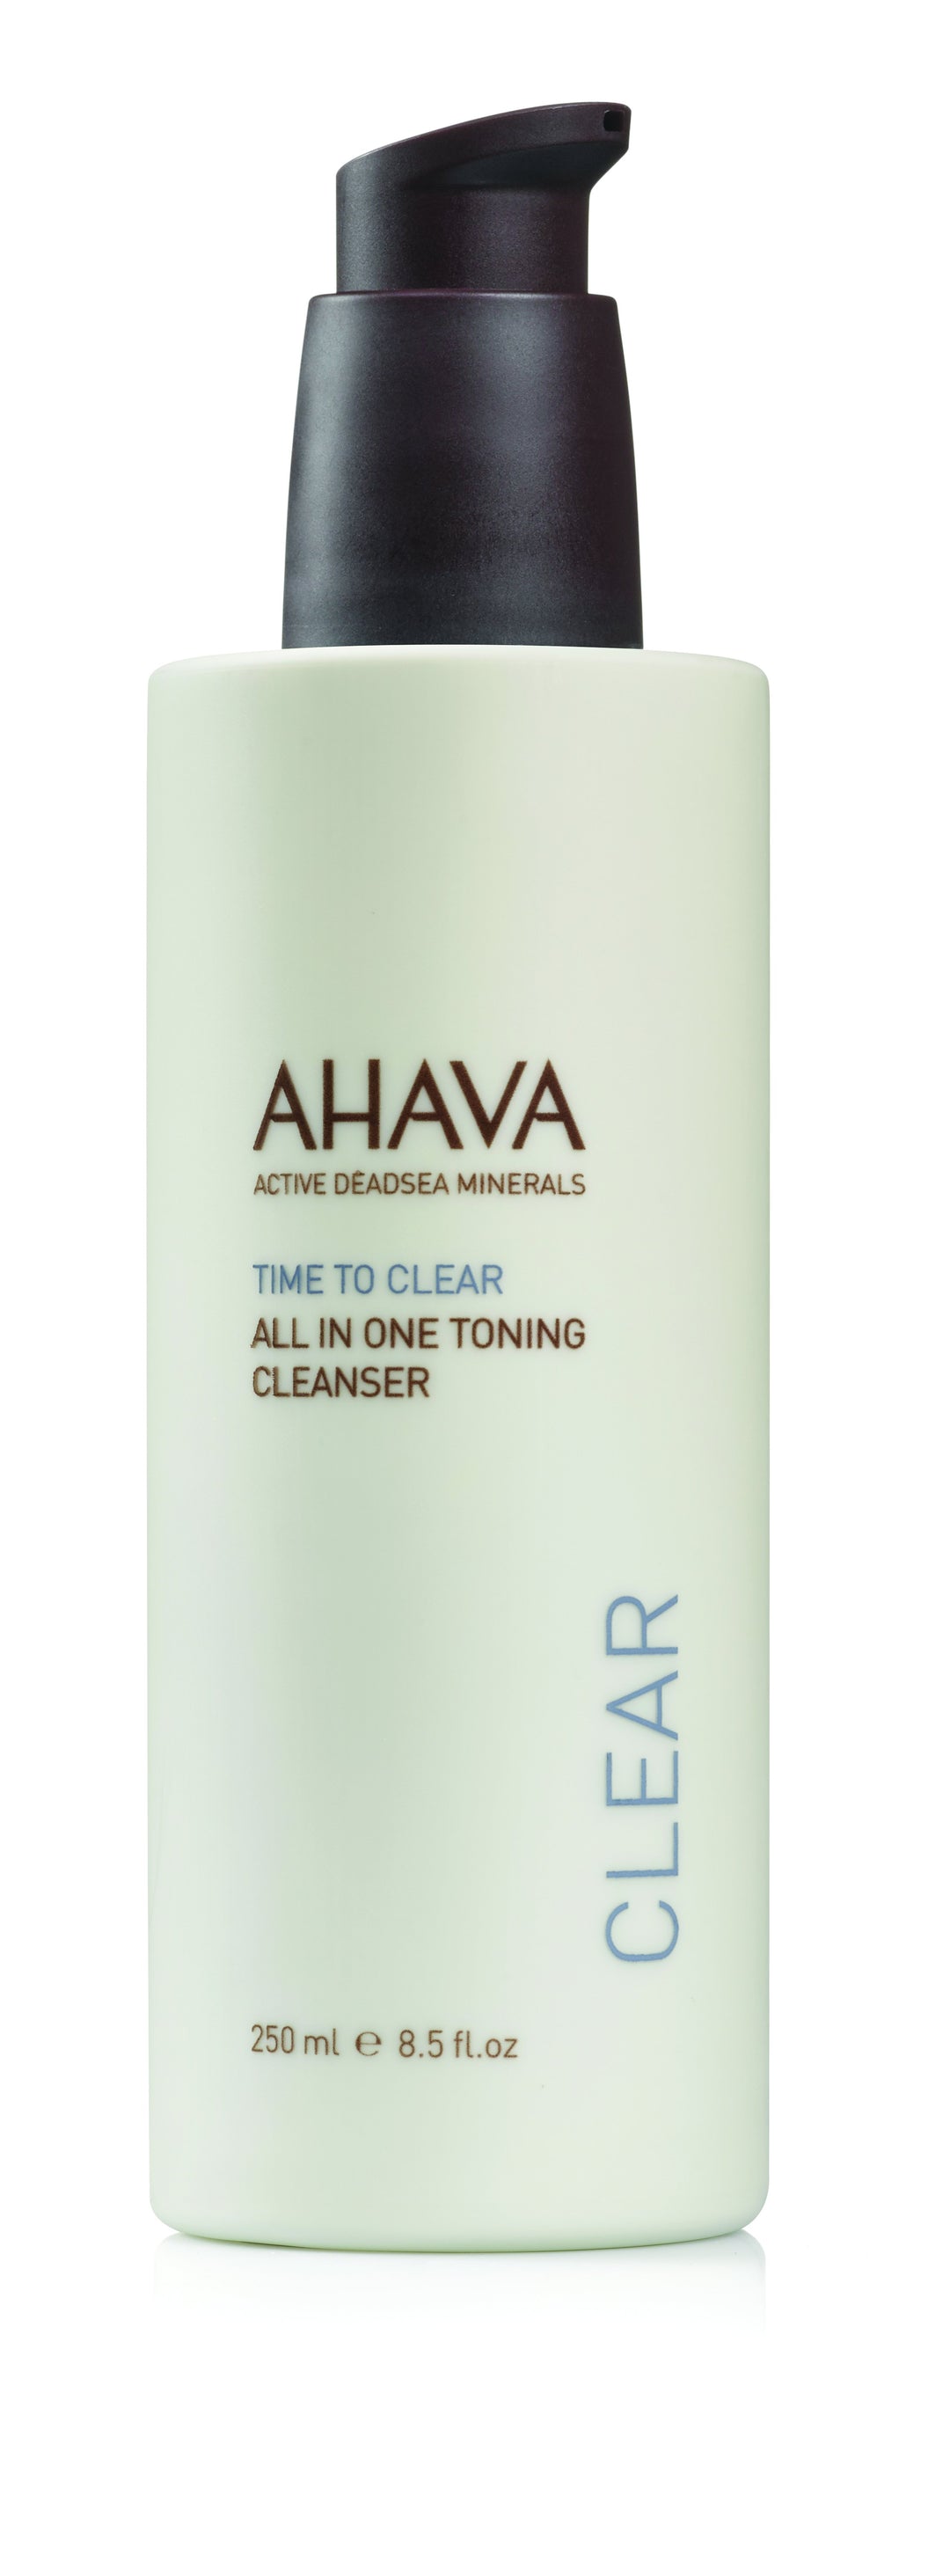 Ahava All in one toning cleanser - SkinEffects Zwolle